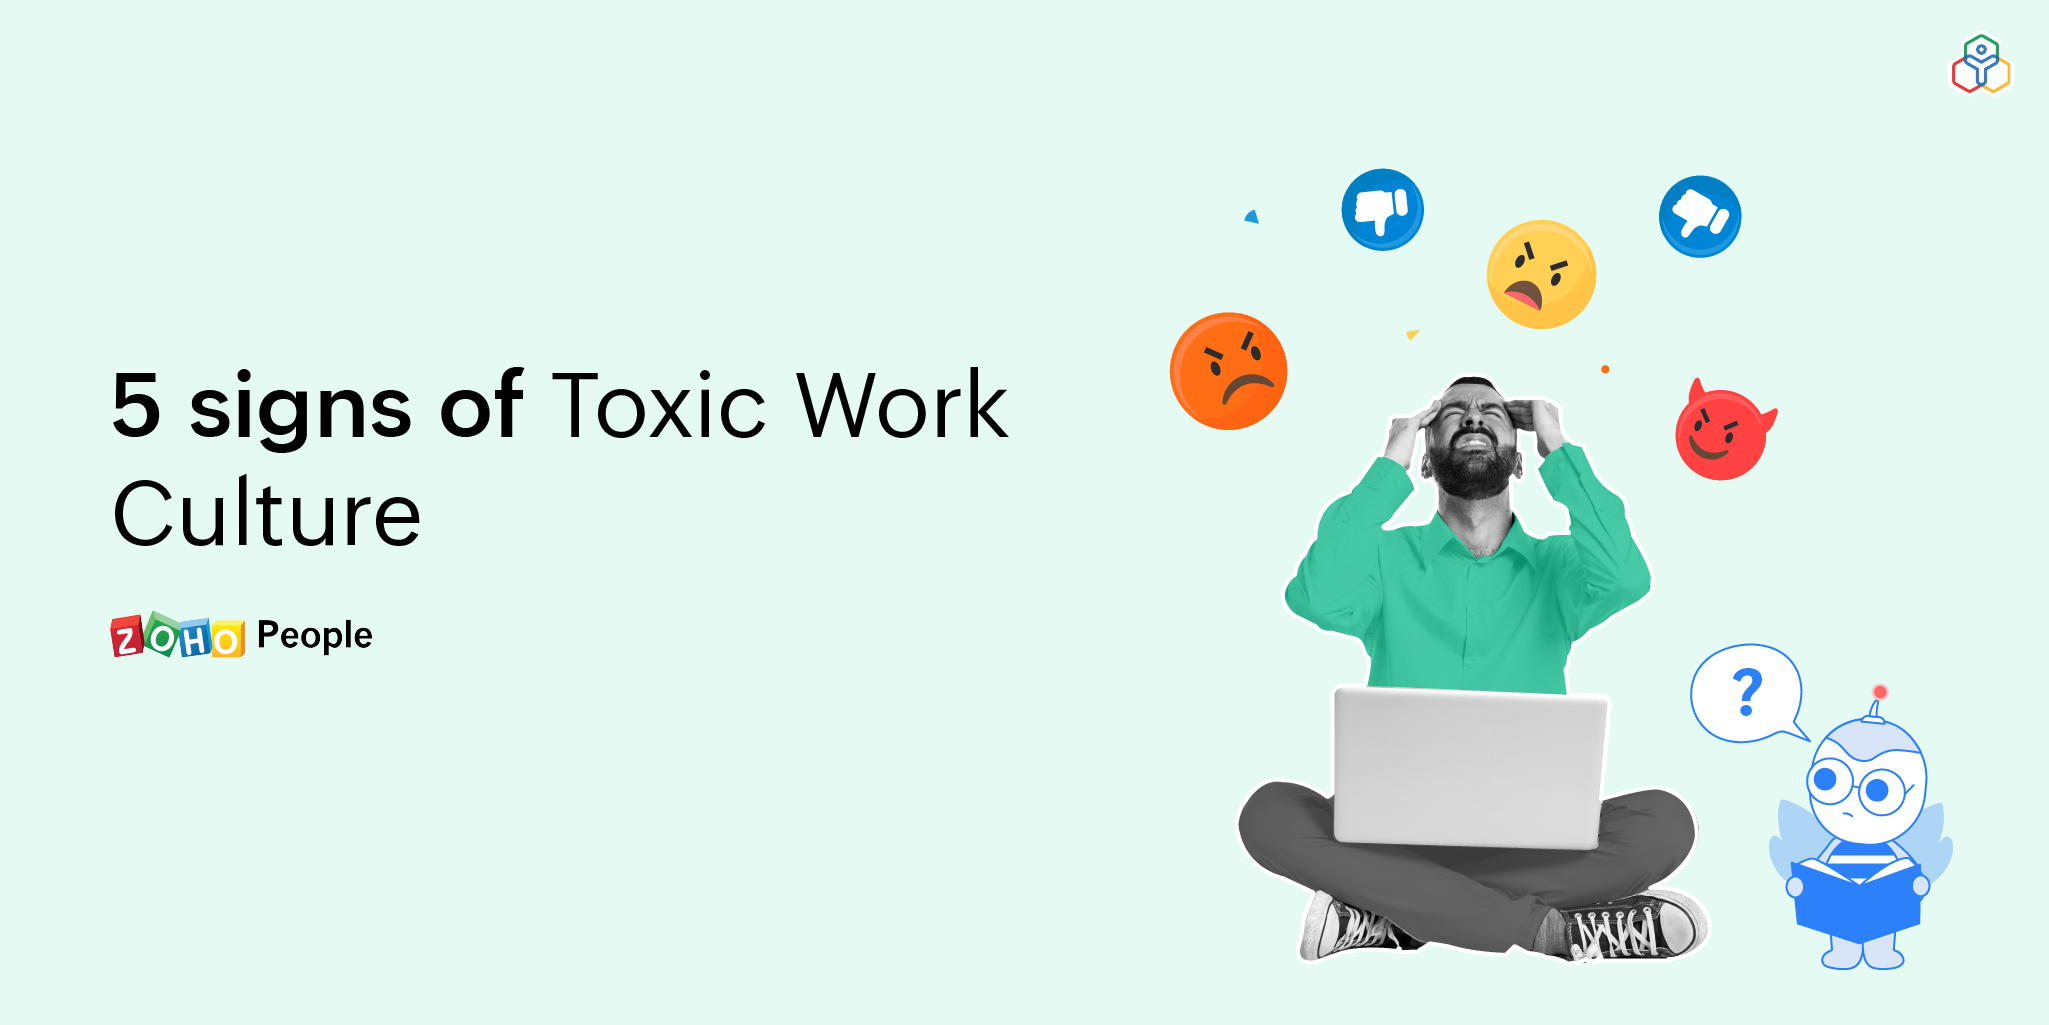 5 Signs of toxic work culture